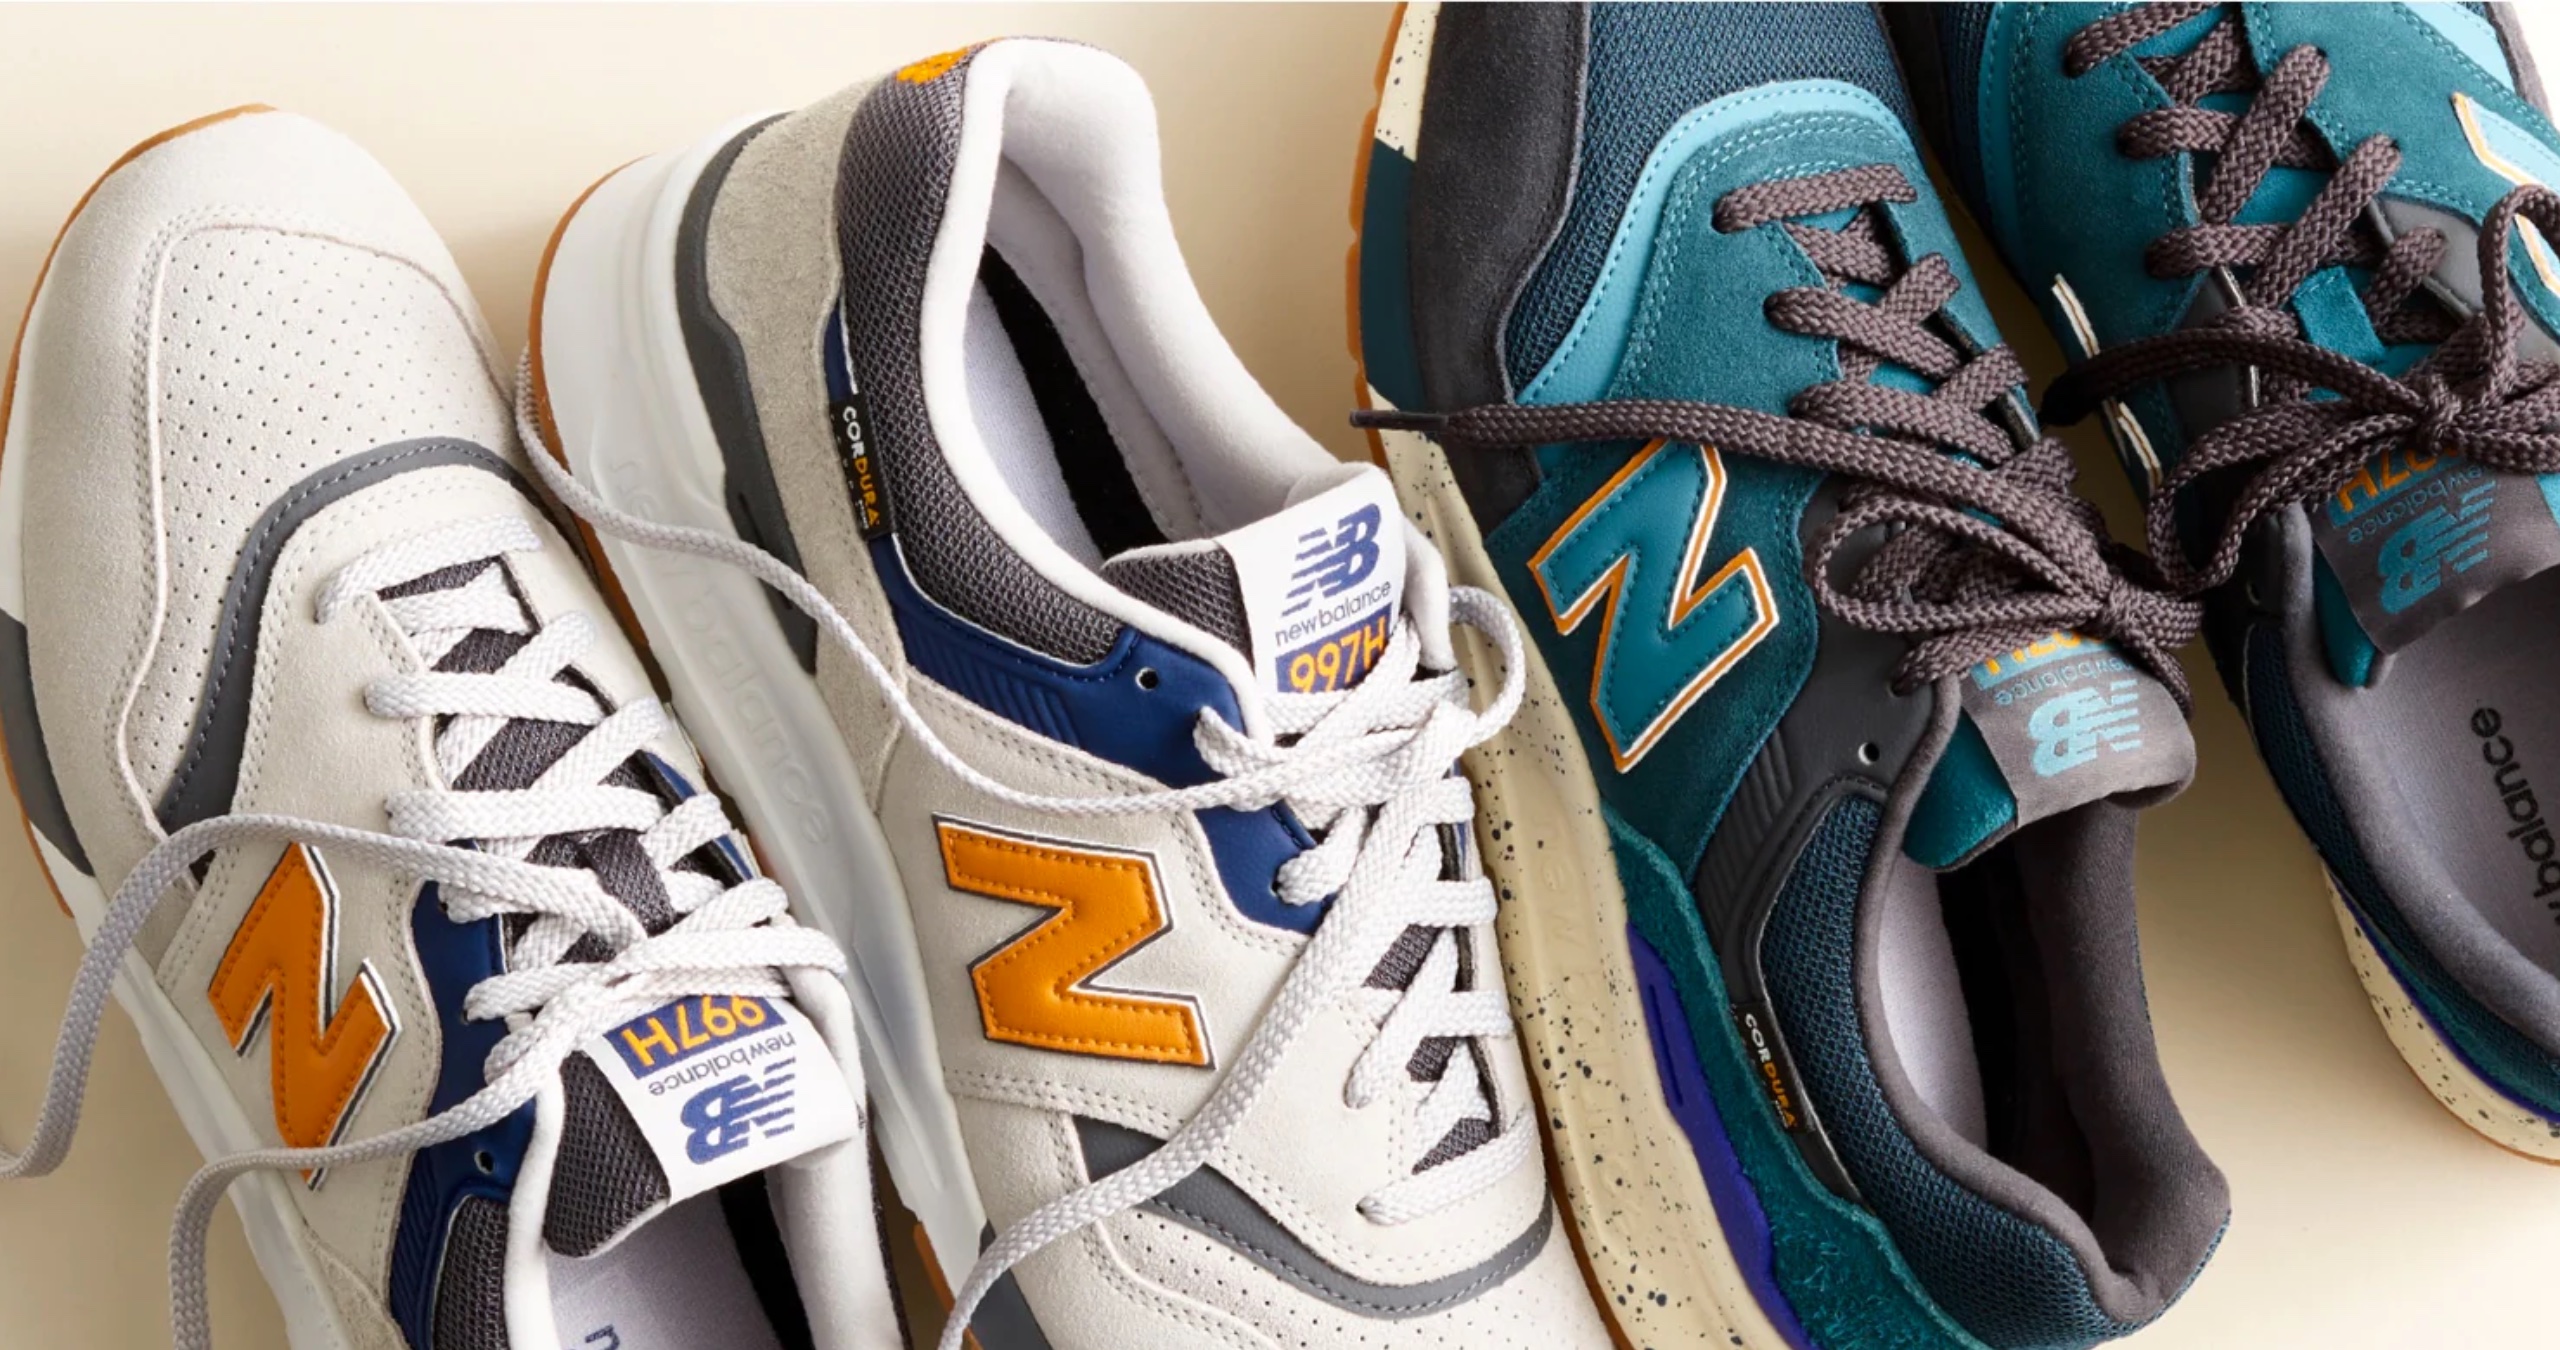 J.Crew partners with New Balance for an exclusive sneaker coll 